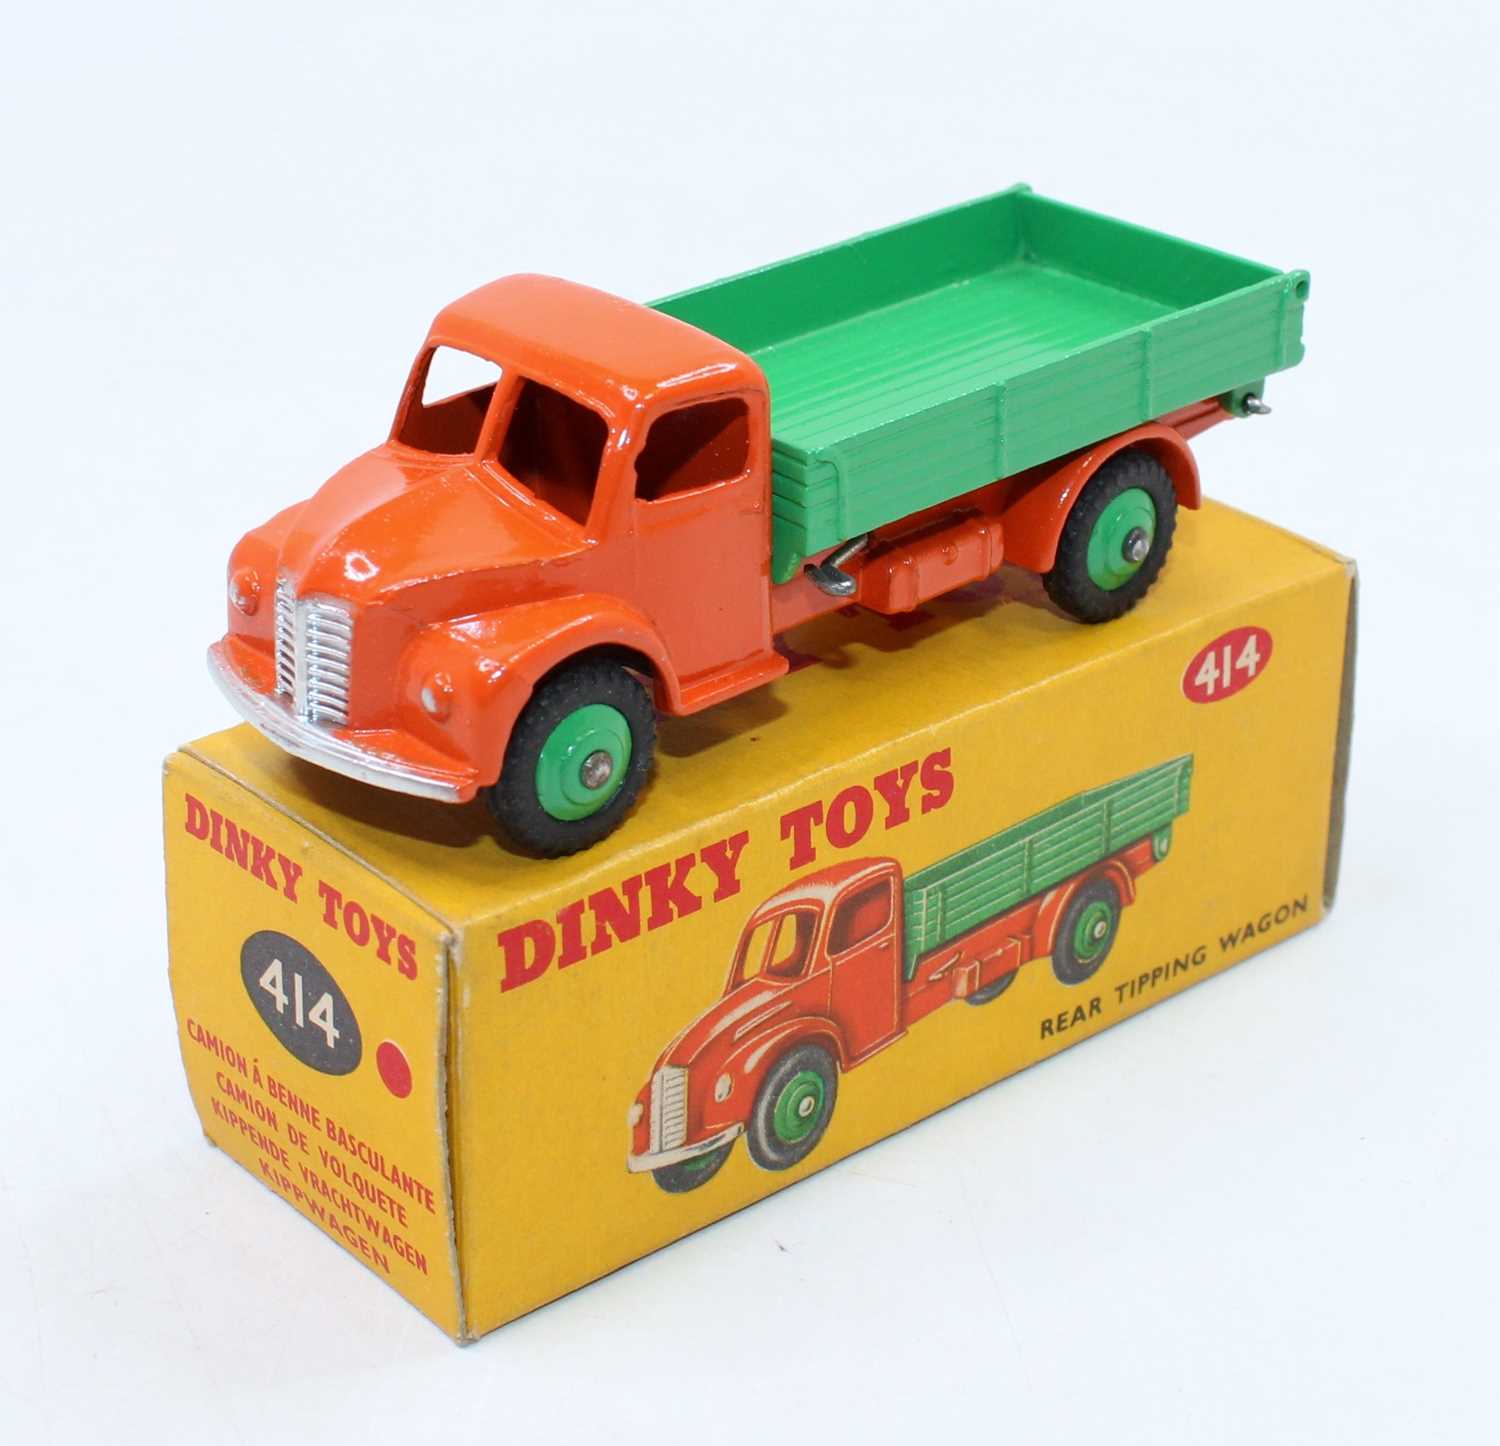 Dinky Toys, 414, Rear Tipping Wagon, orange chassis, green hubs and back, in the original all card